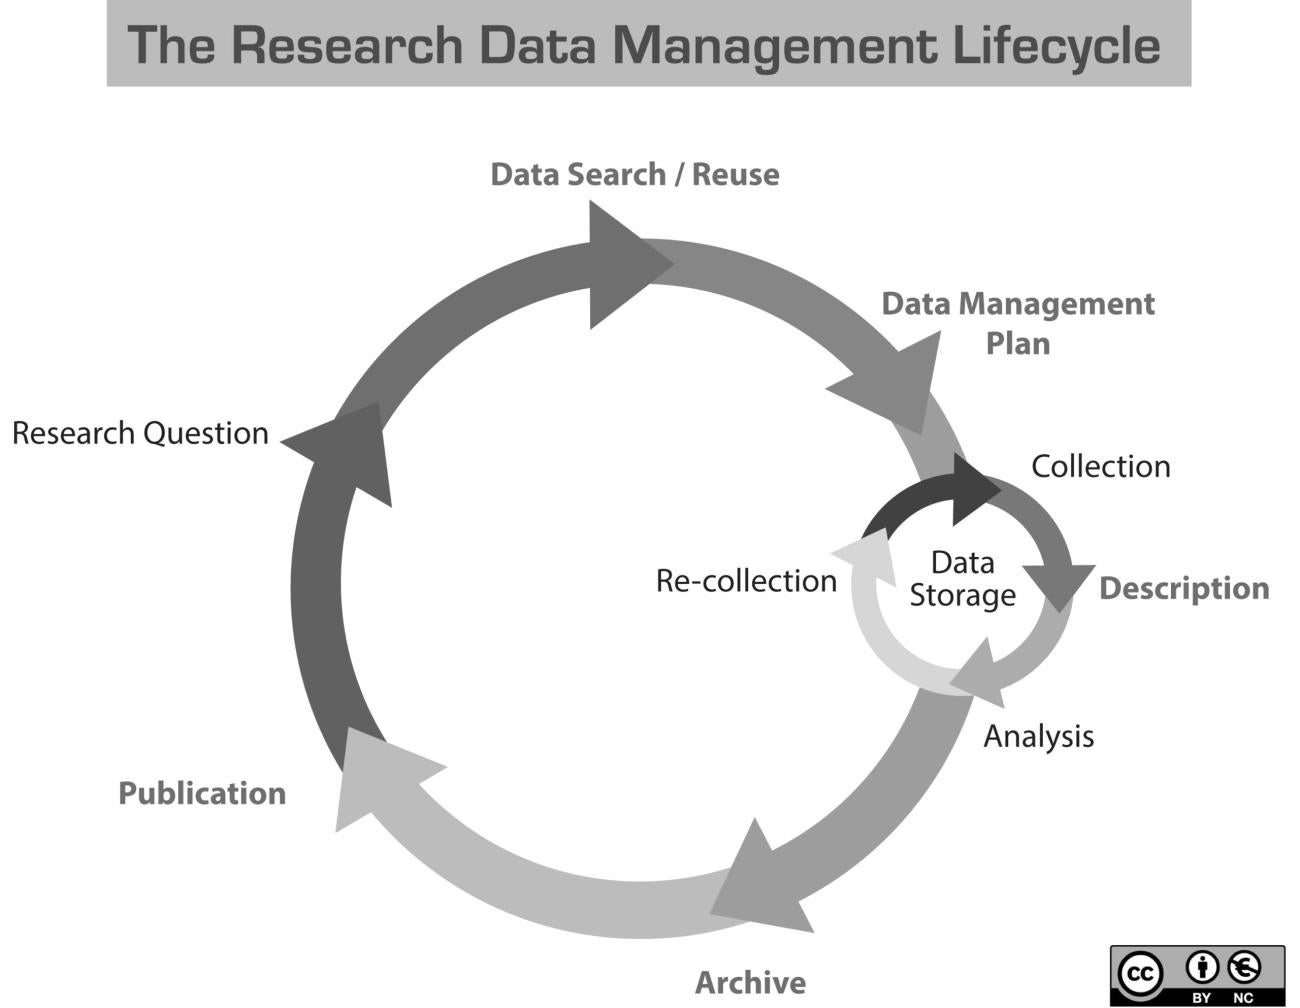 Research Matters dives into big data projects, management services at UO